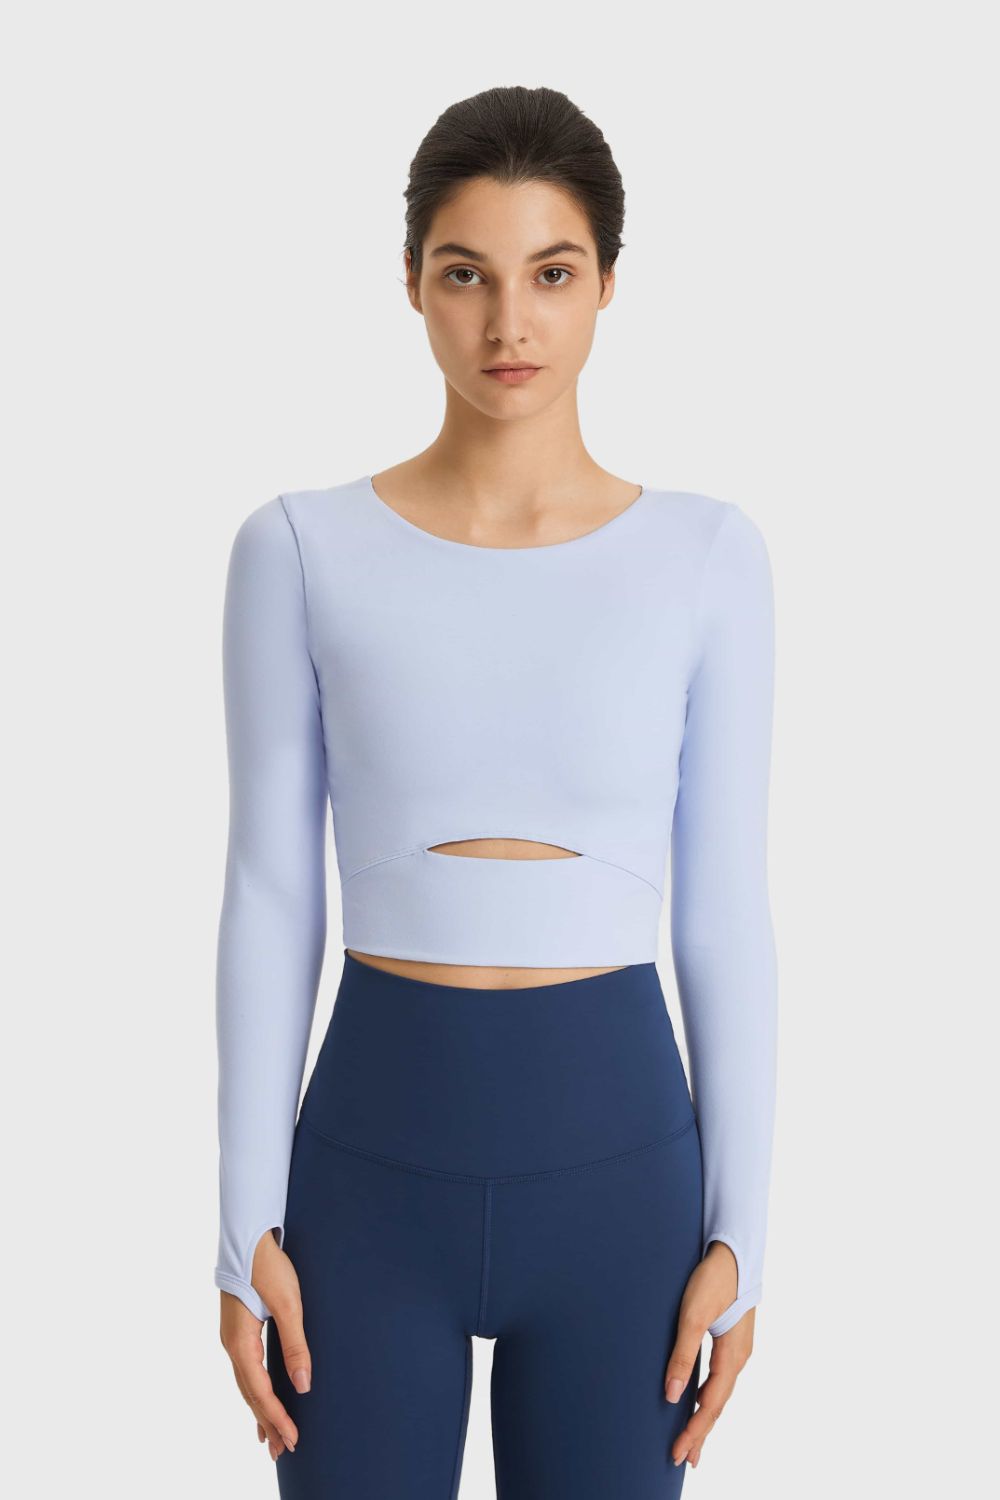 Cutout Long Sleeve Cropped Sports Top - Sky Blue / 4 Apparel & Accessories Wynter 4 All Seasons